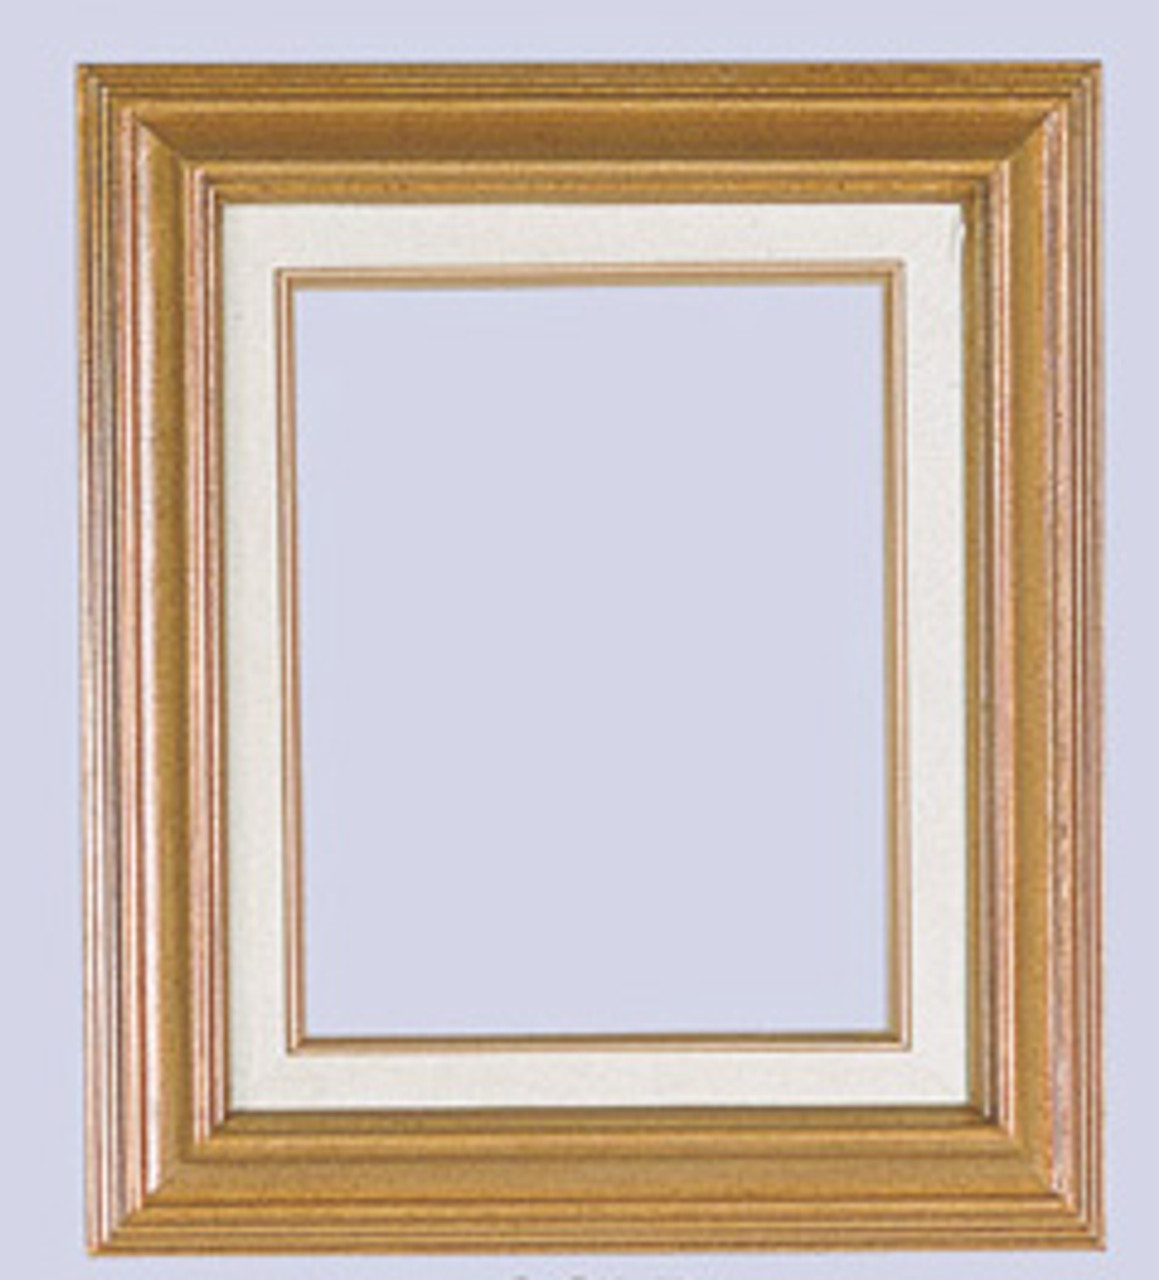 3 Inch Econo Wood Frames With Linen Liners: 16X40